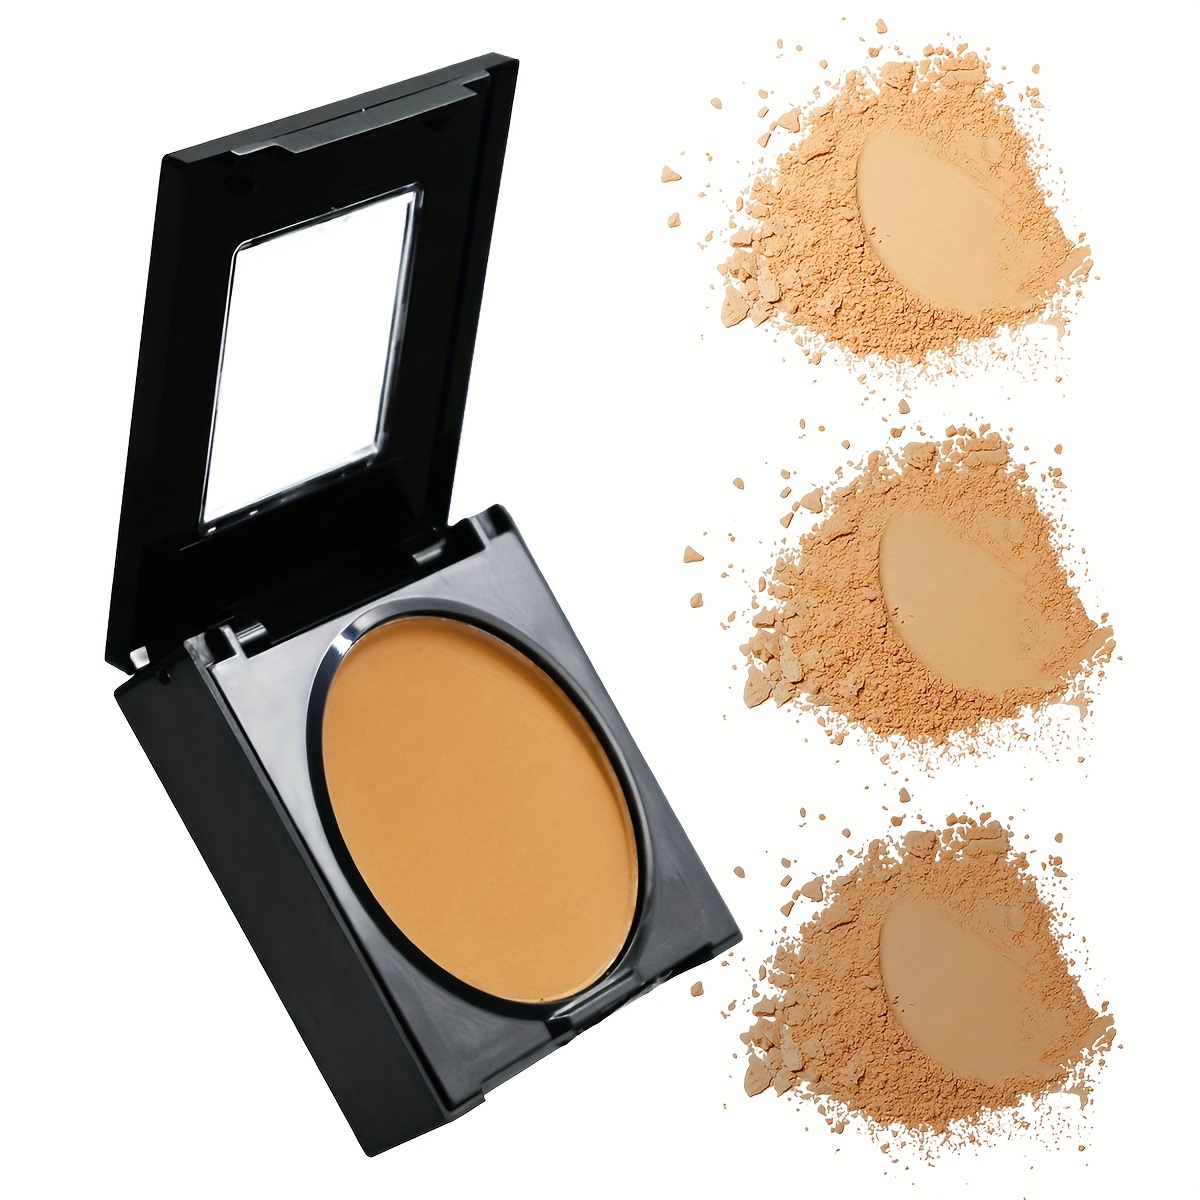 

Matte Nature Bronzer Compact Powder With Puff, Full Coverage Long Lasting Face Makeup, Finish Waterproof Bronzing For Dark Skin Contain Plant Squalane